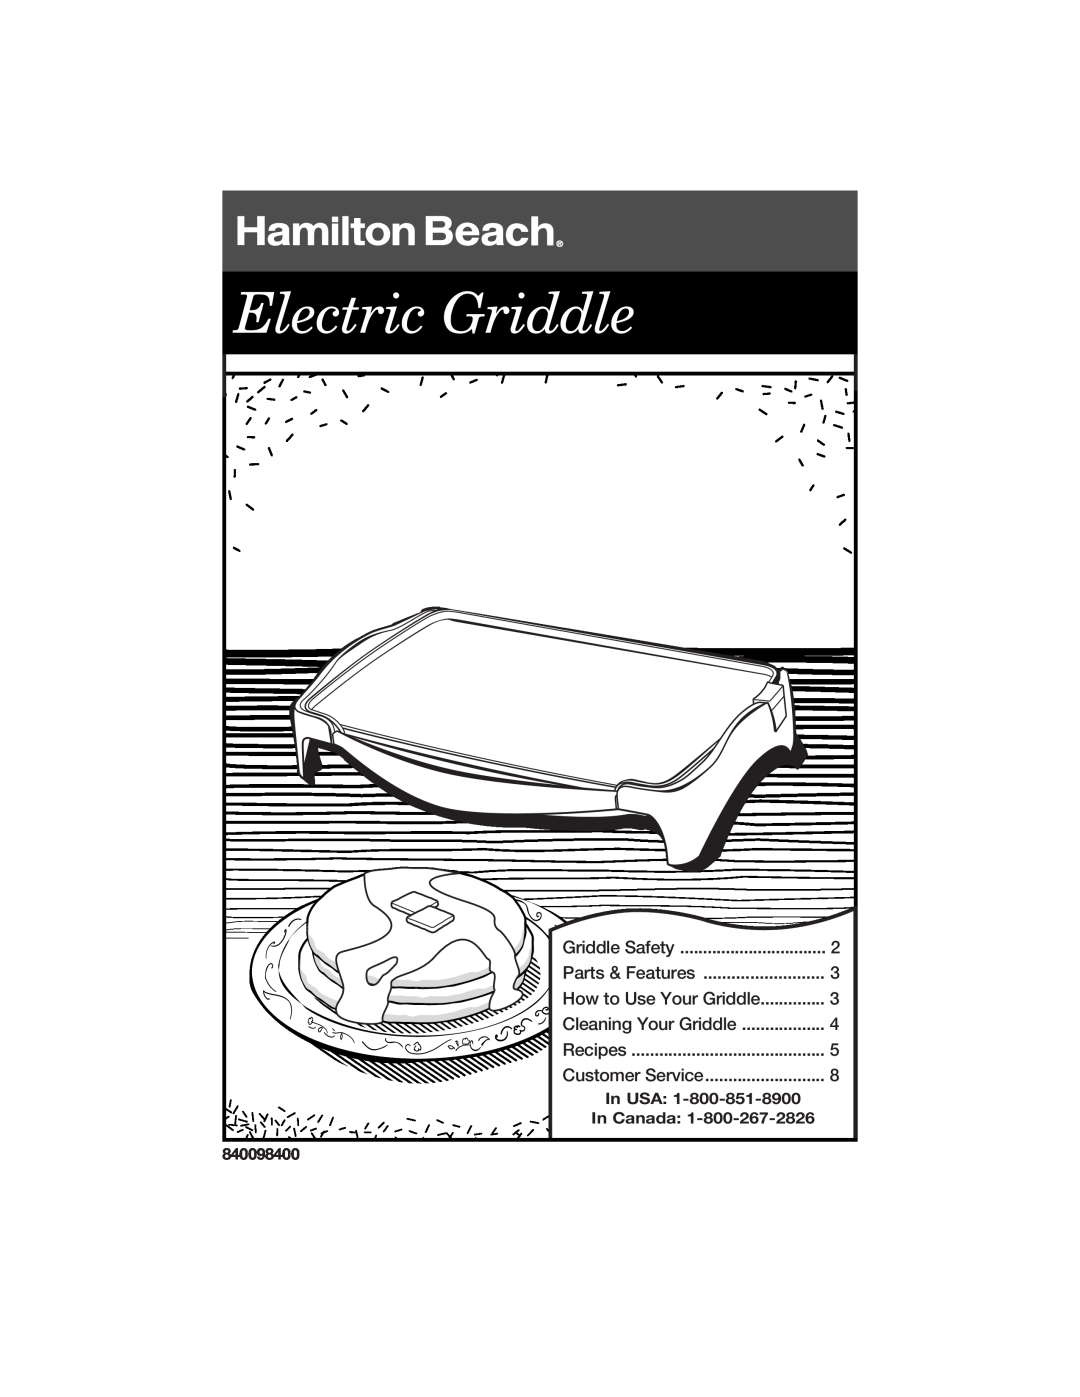 Hamilton Beach 840098400 manual Electric Griddle, How to Use Your Griddle, In USA, In Canada 